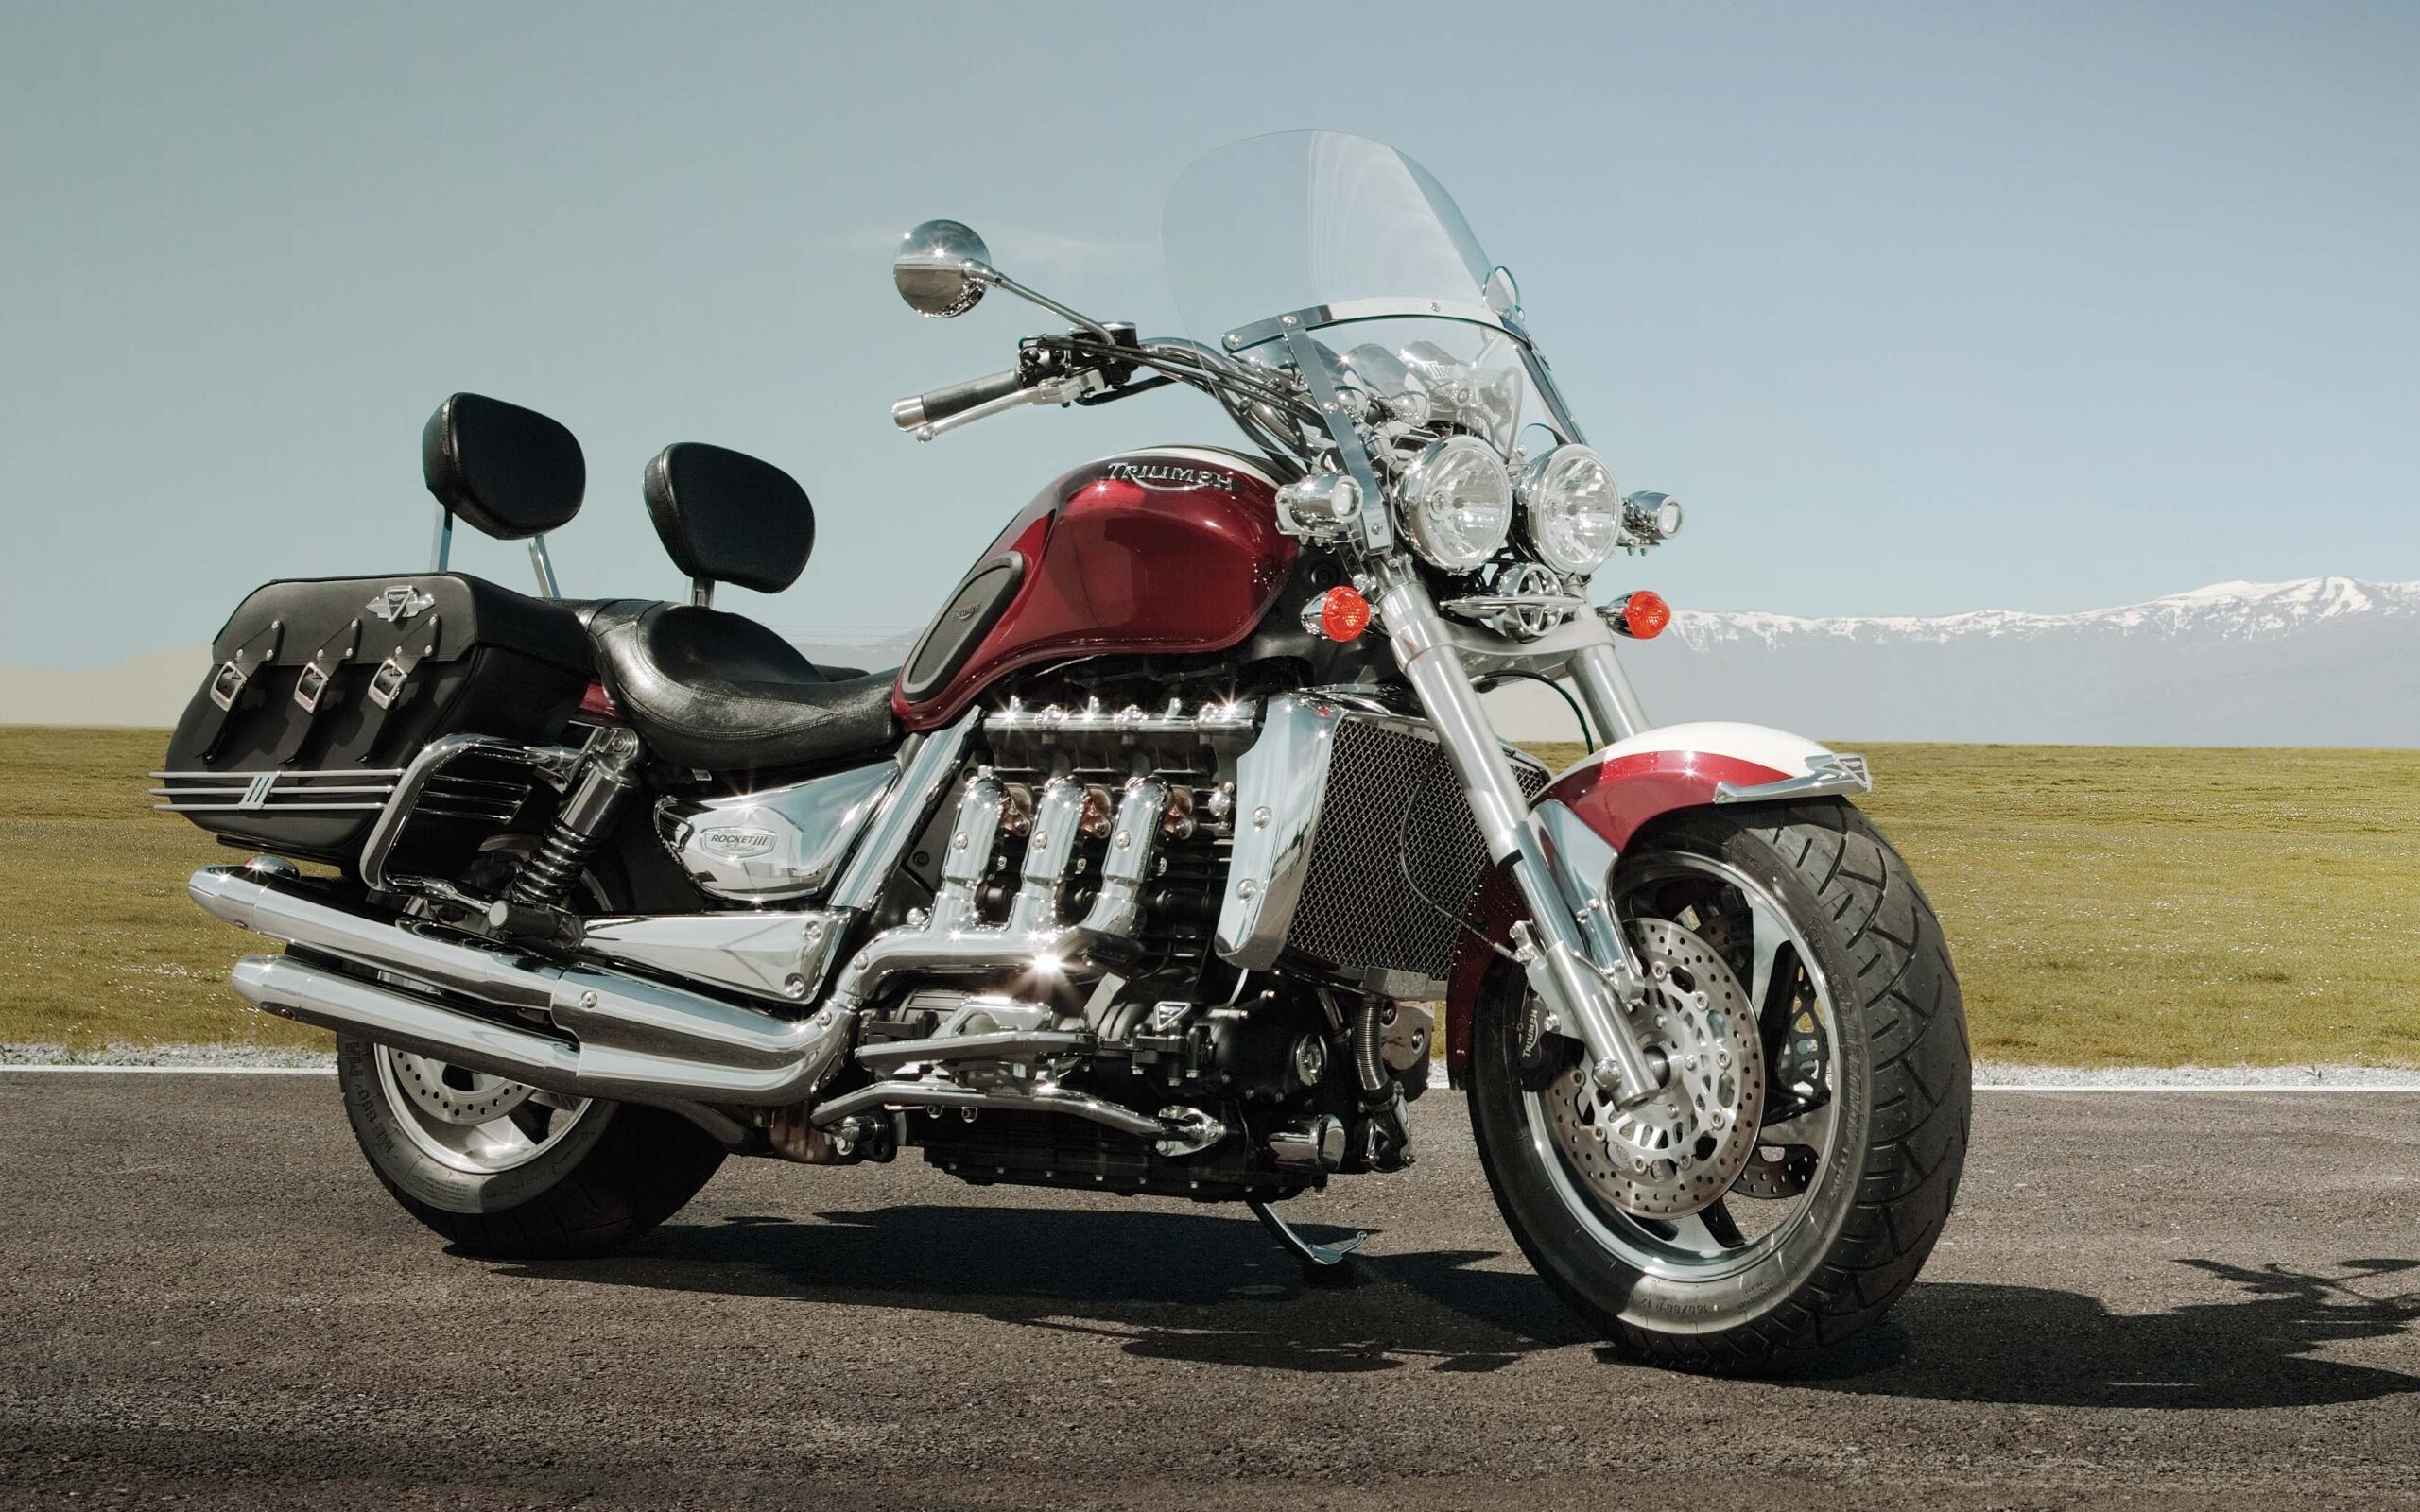 Triumph Motorcycles: Rocket 3, High performance muscle roadster, A motorcycle legend. 2560x1600 HD Wallpaper.